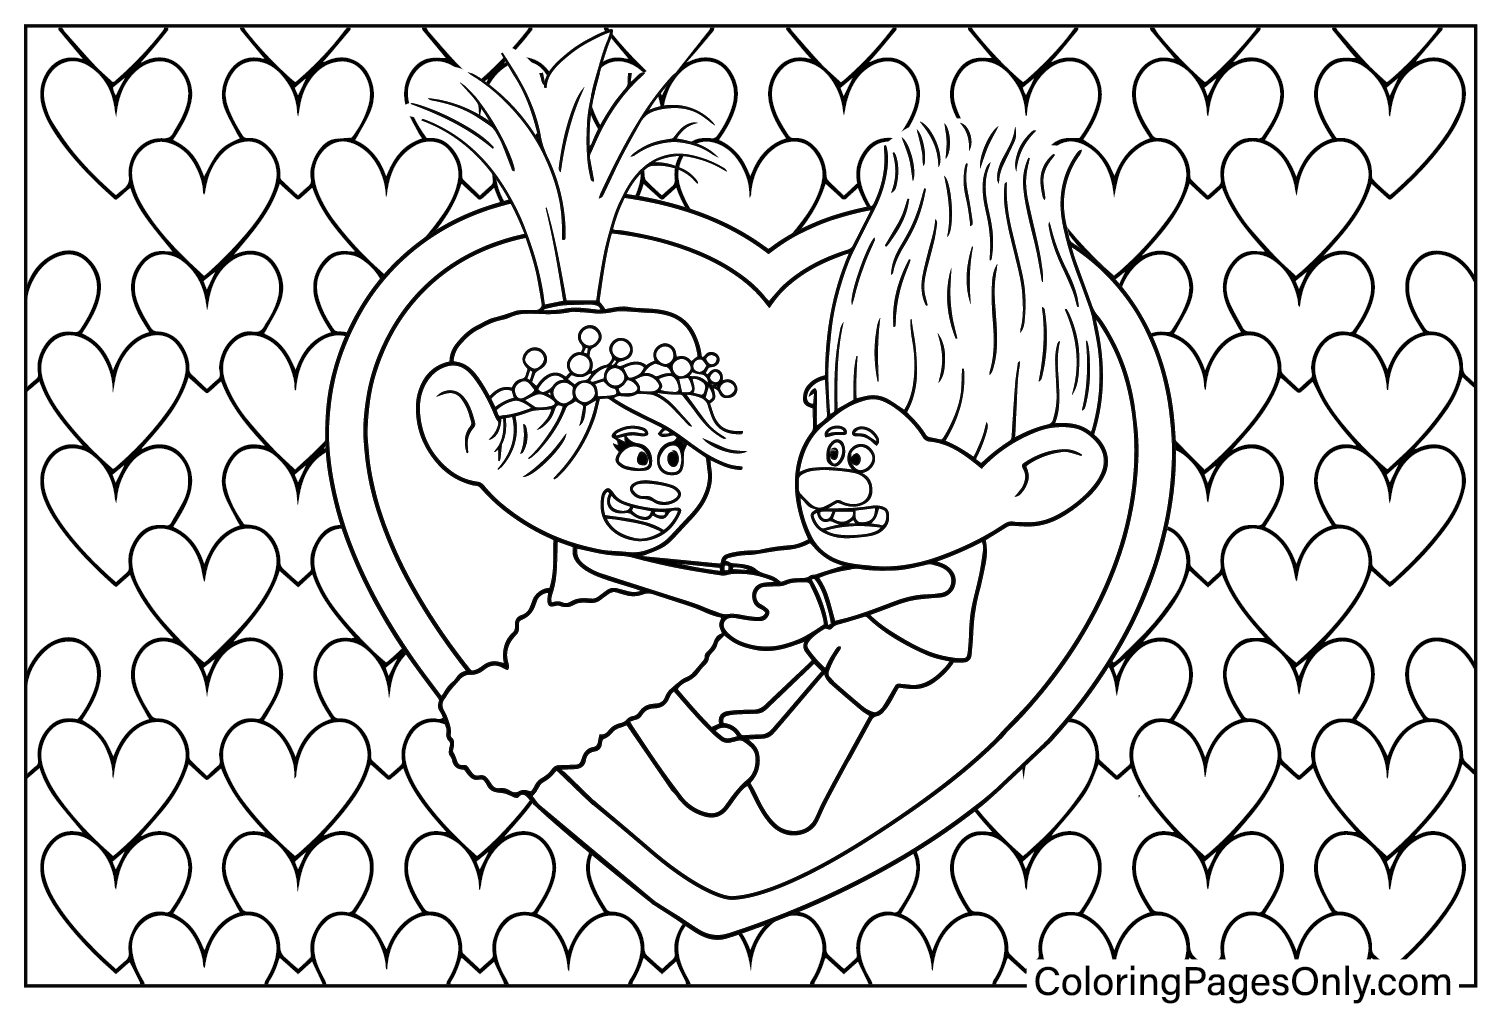 Trolls Band Together Coloring Pages Free Printable Coloring Pages